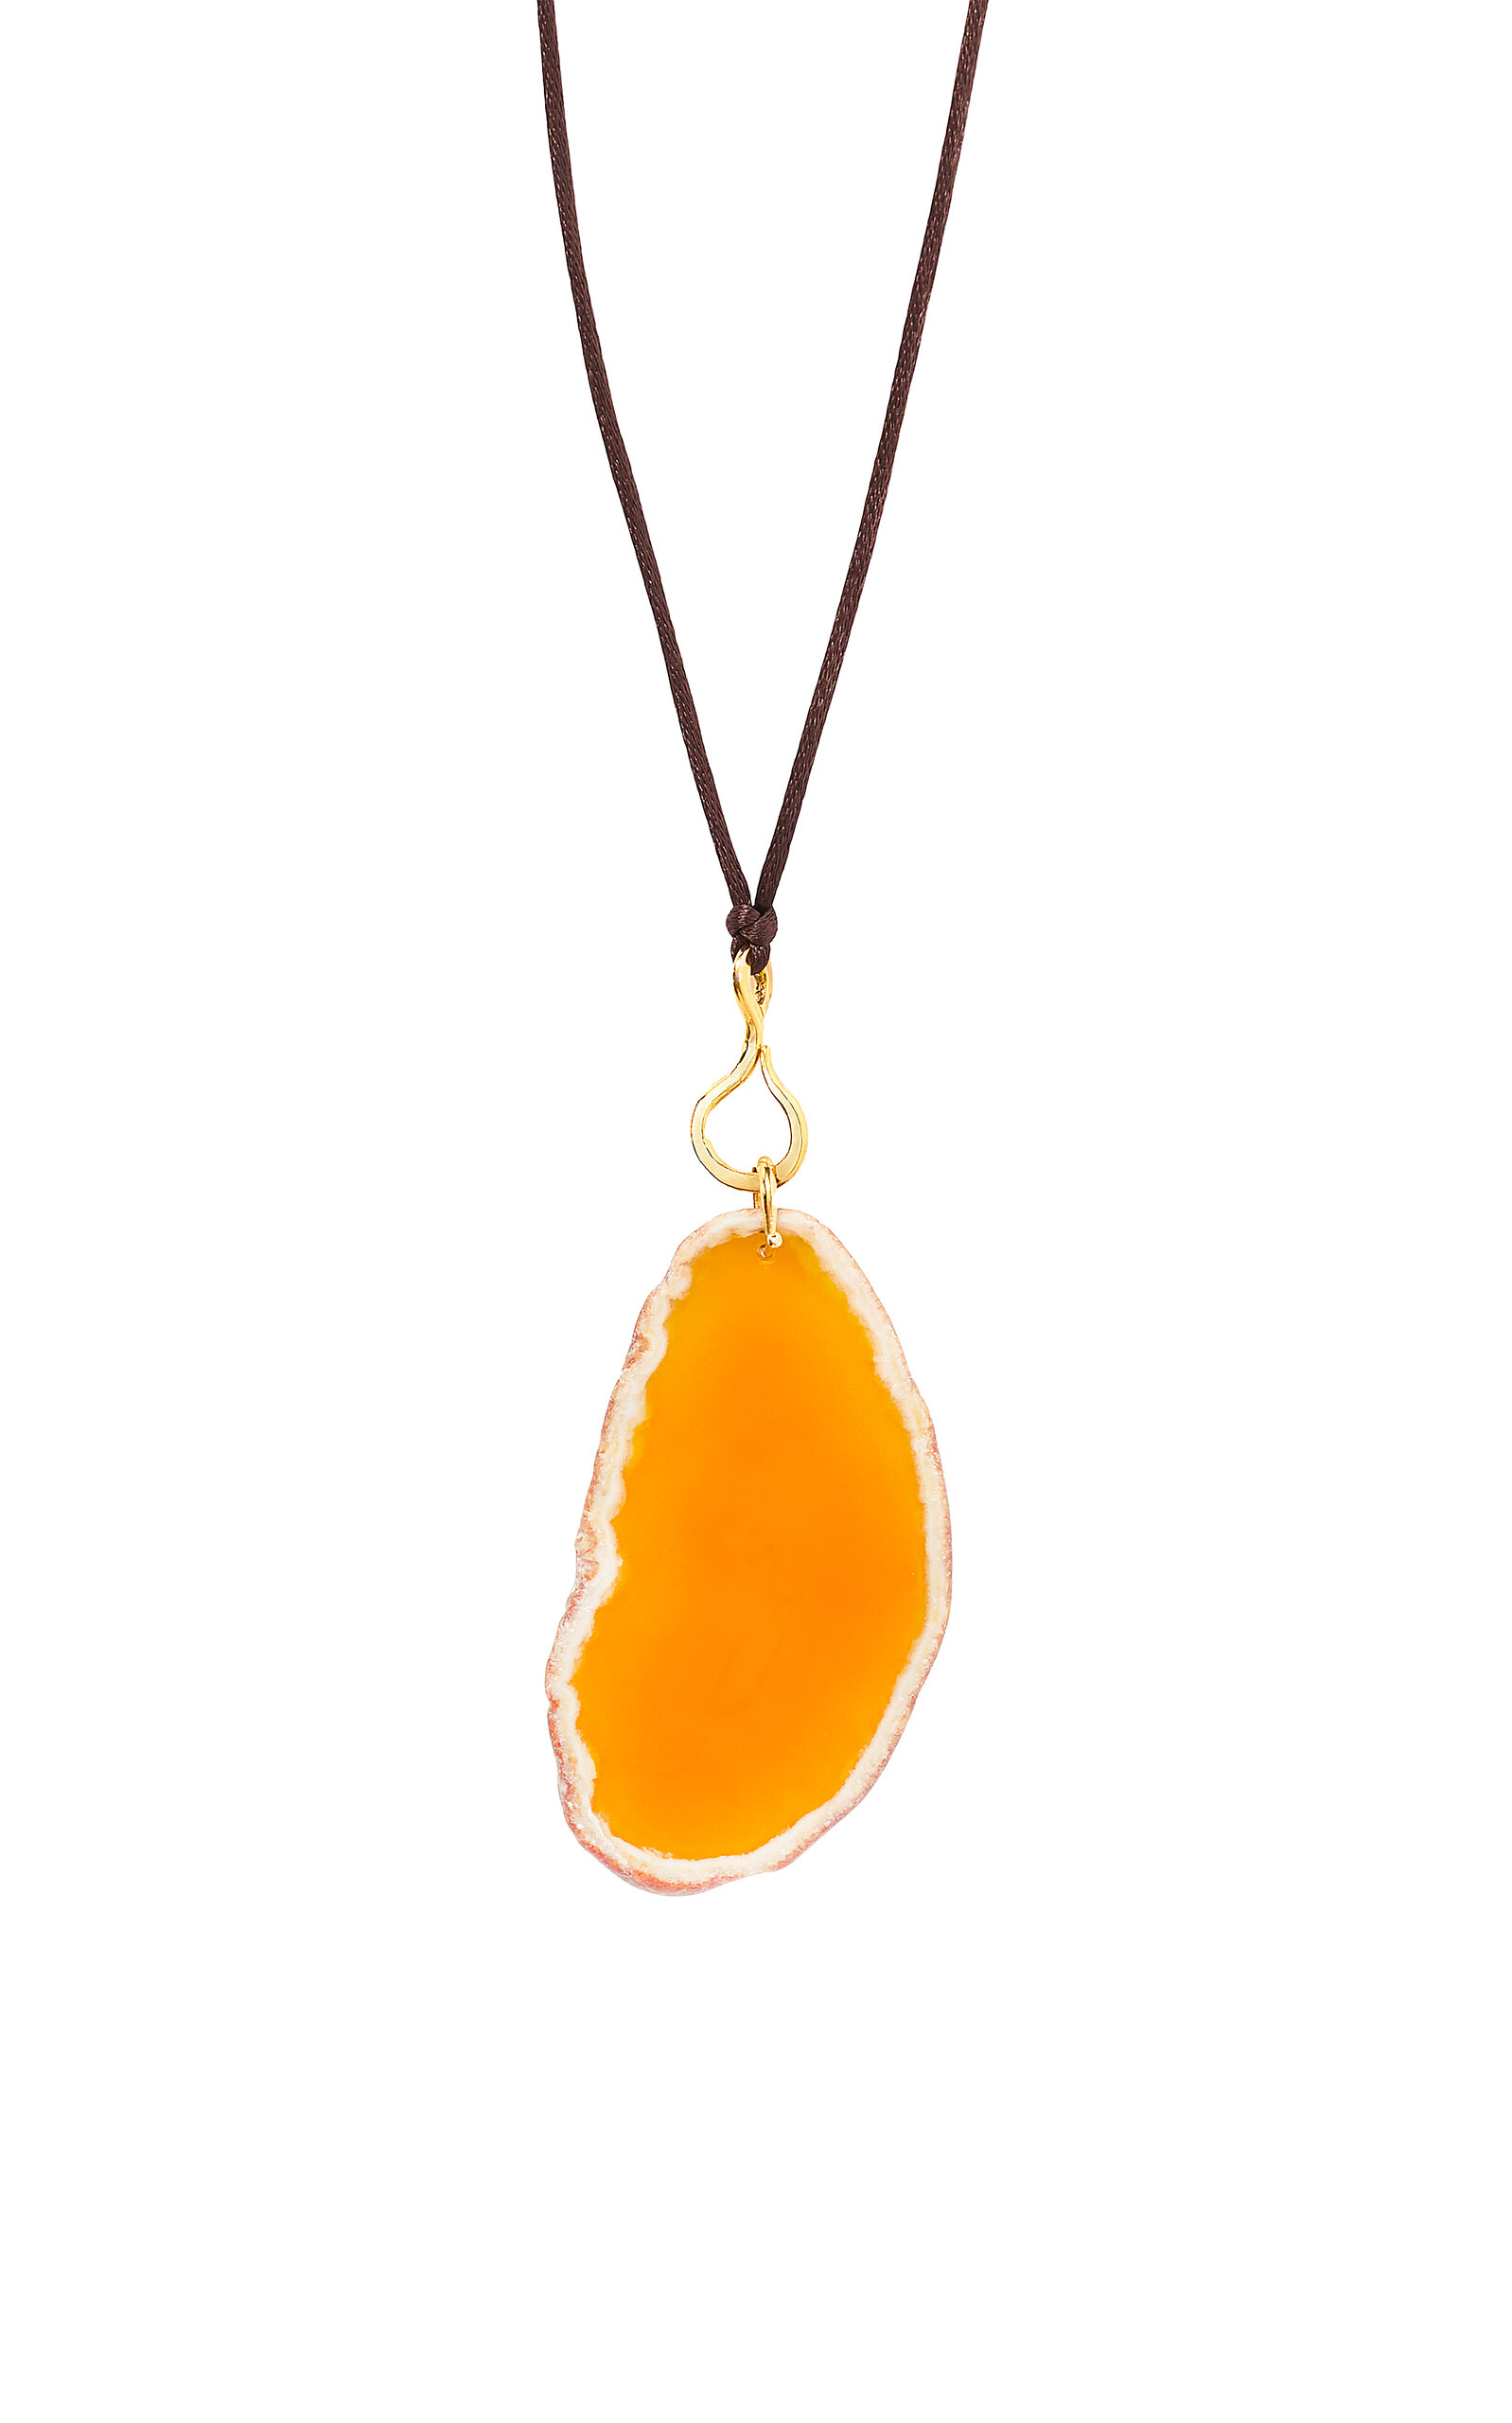 Exclusive Sienna Agate Necklace